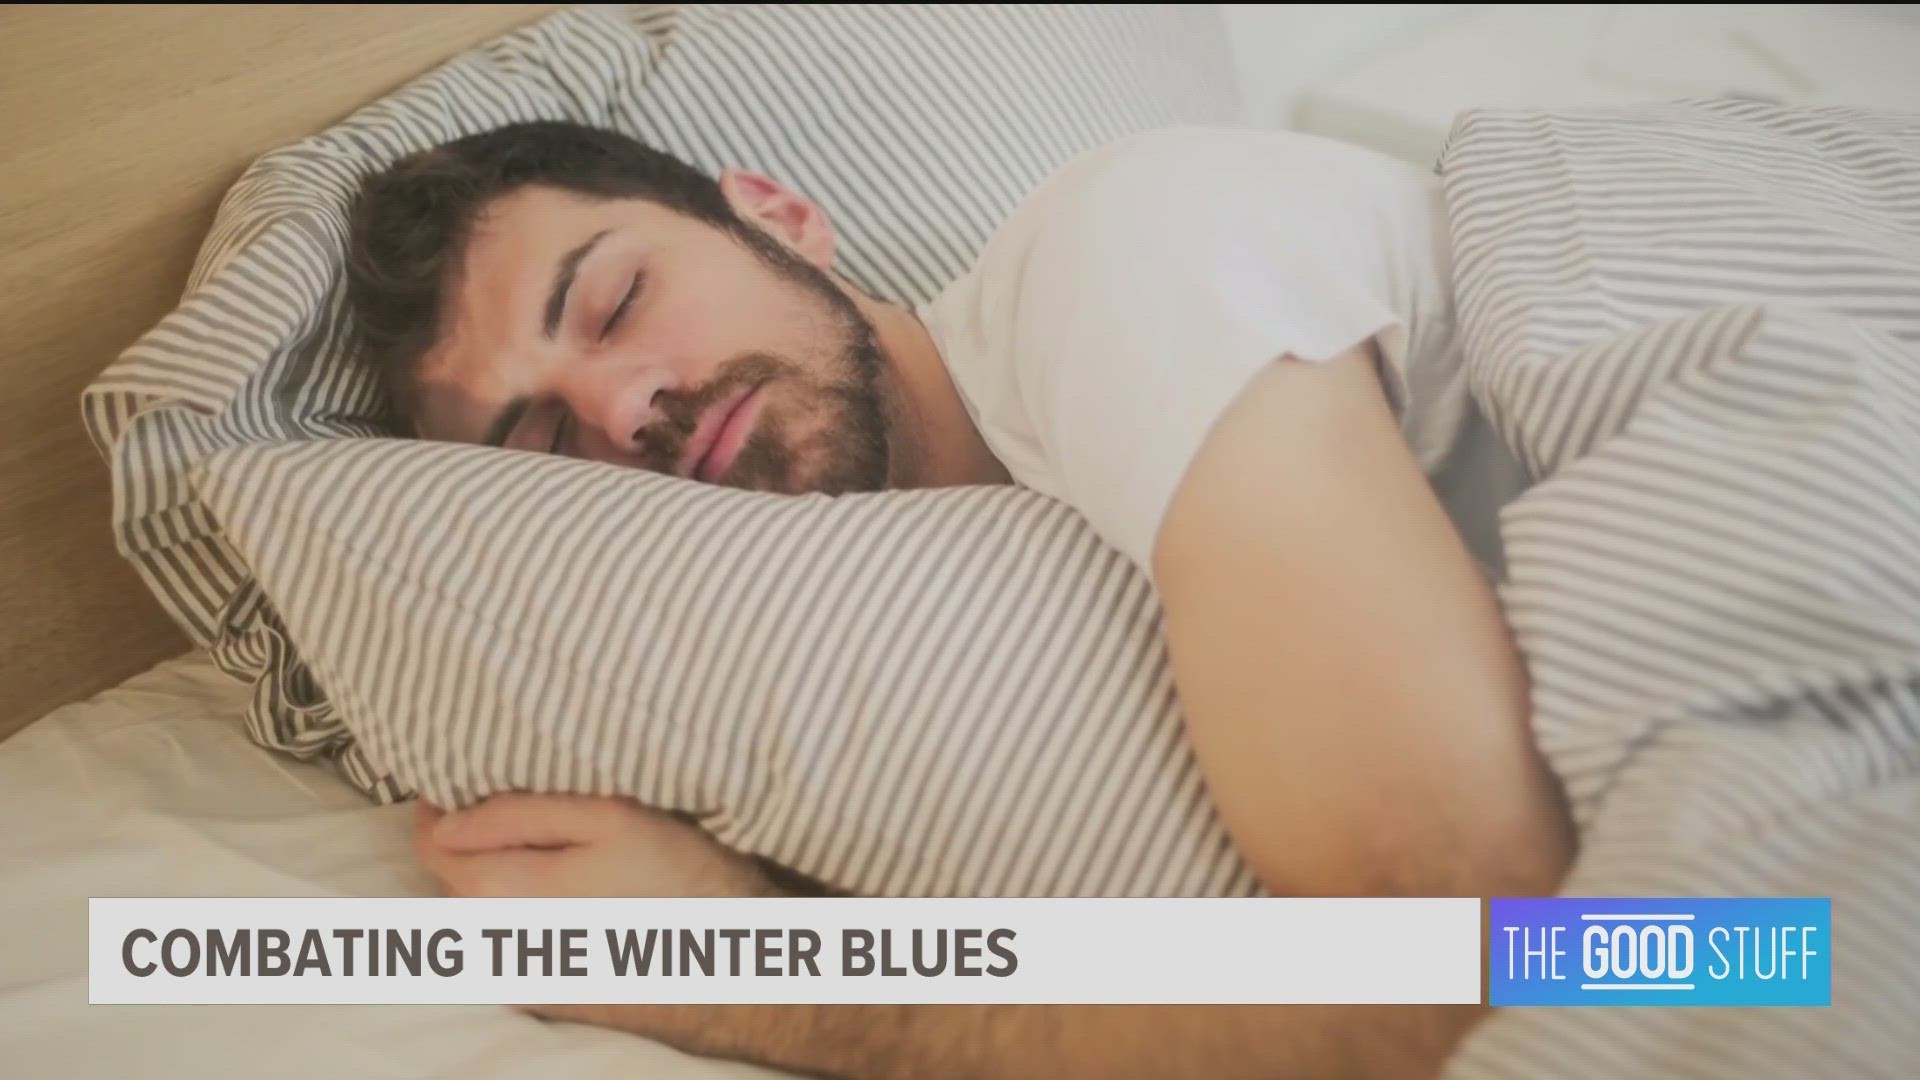 Daylight saving time ends this weekend and the shift to shorter days can lead to the winter blues. One way to combat that is by maintaining your sleep hygiene.